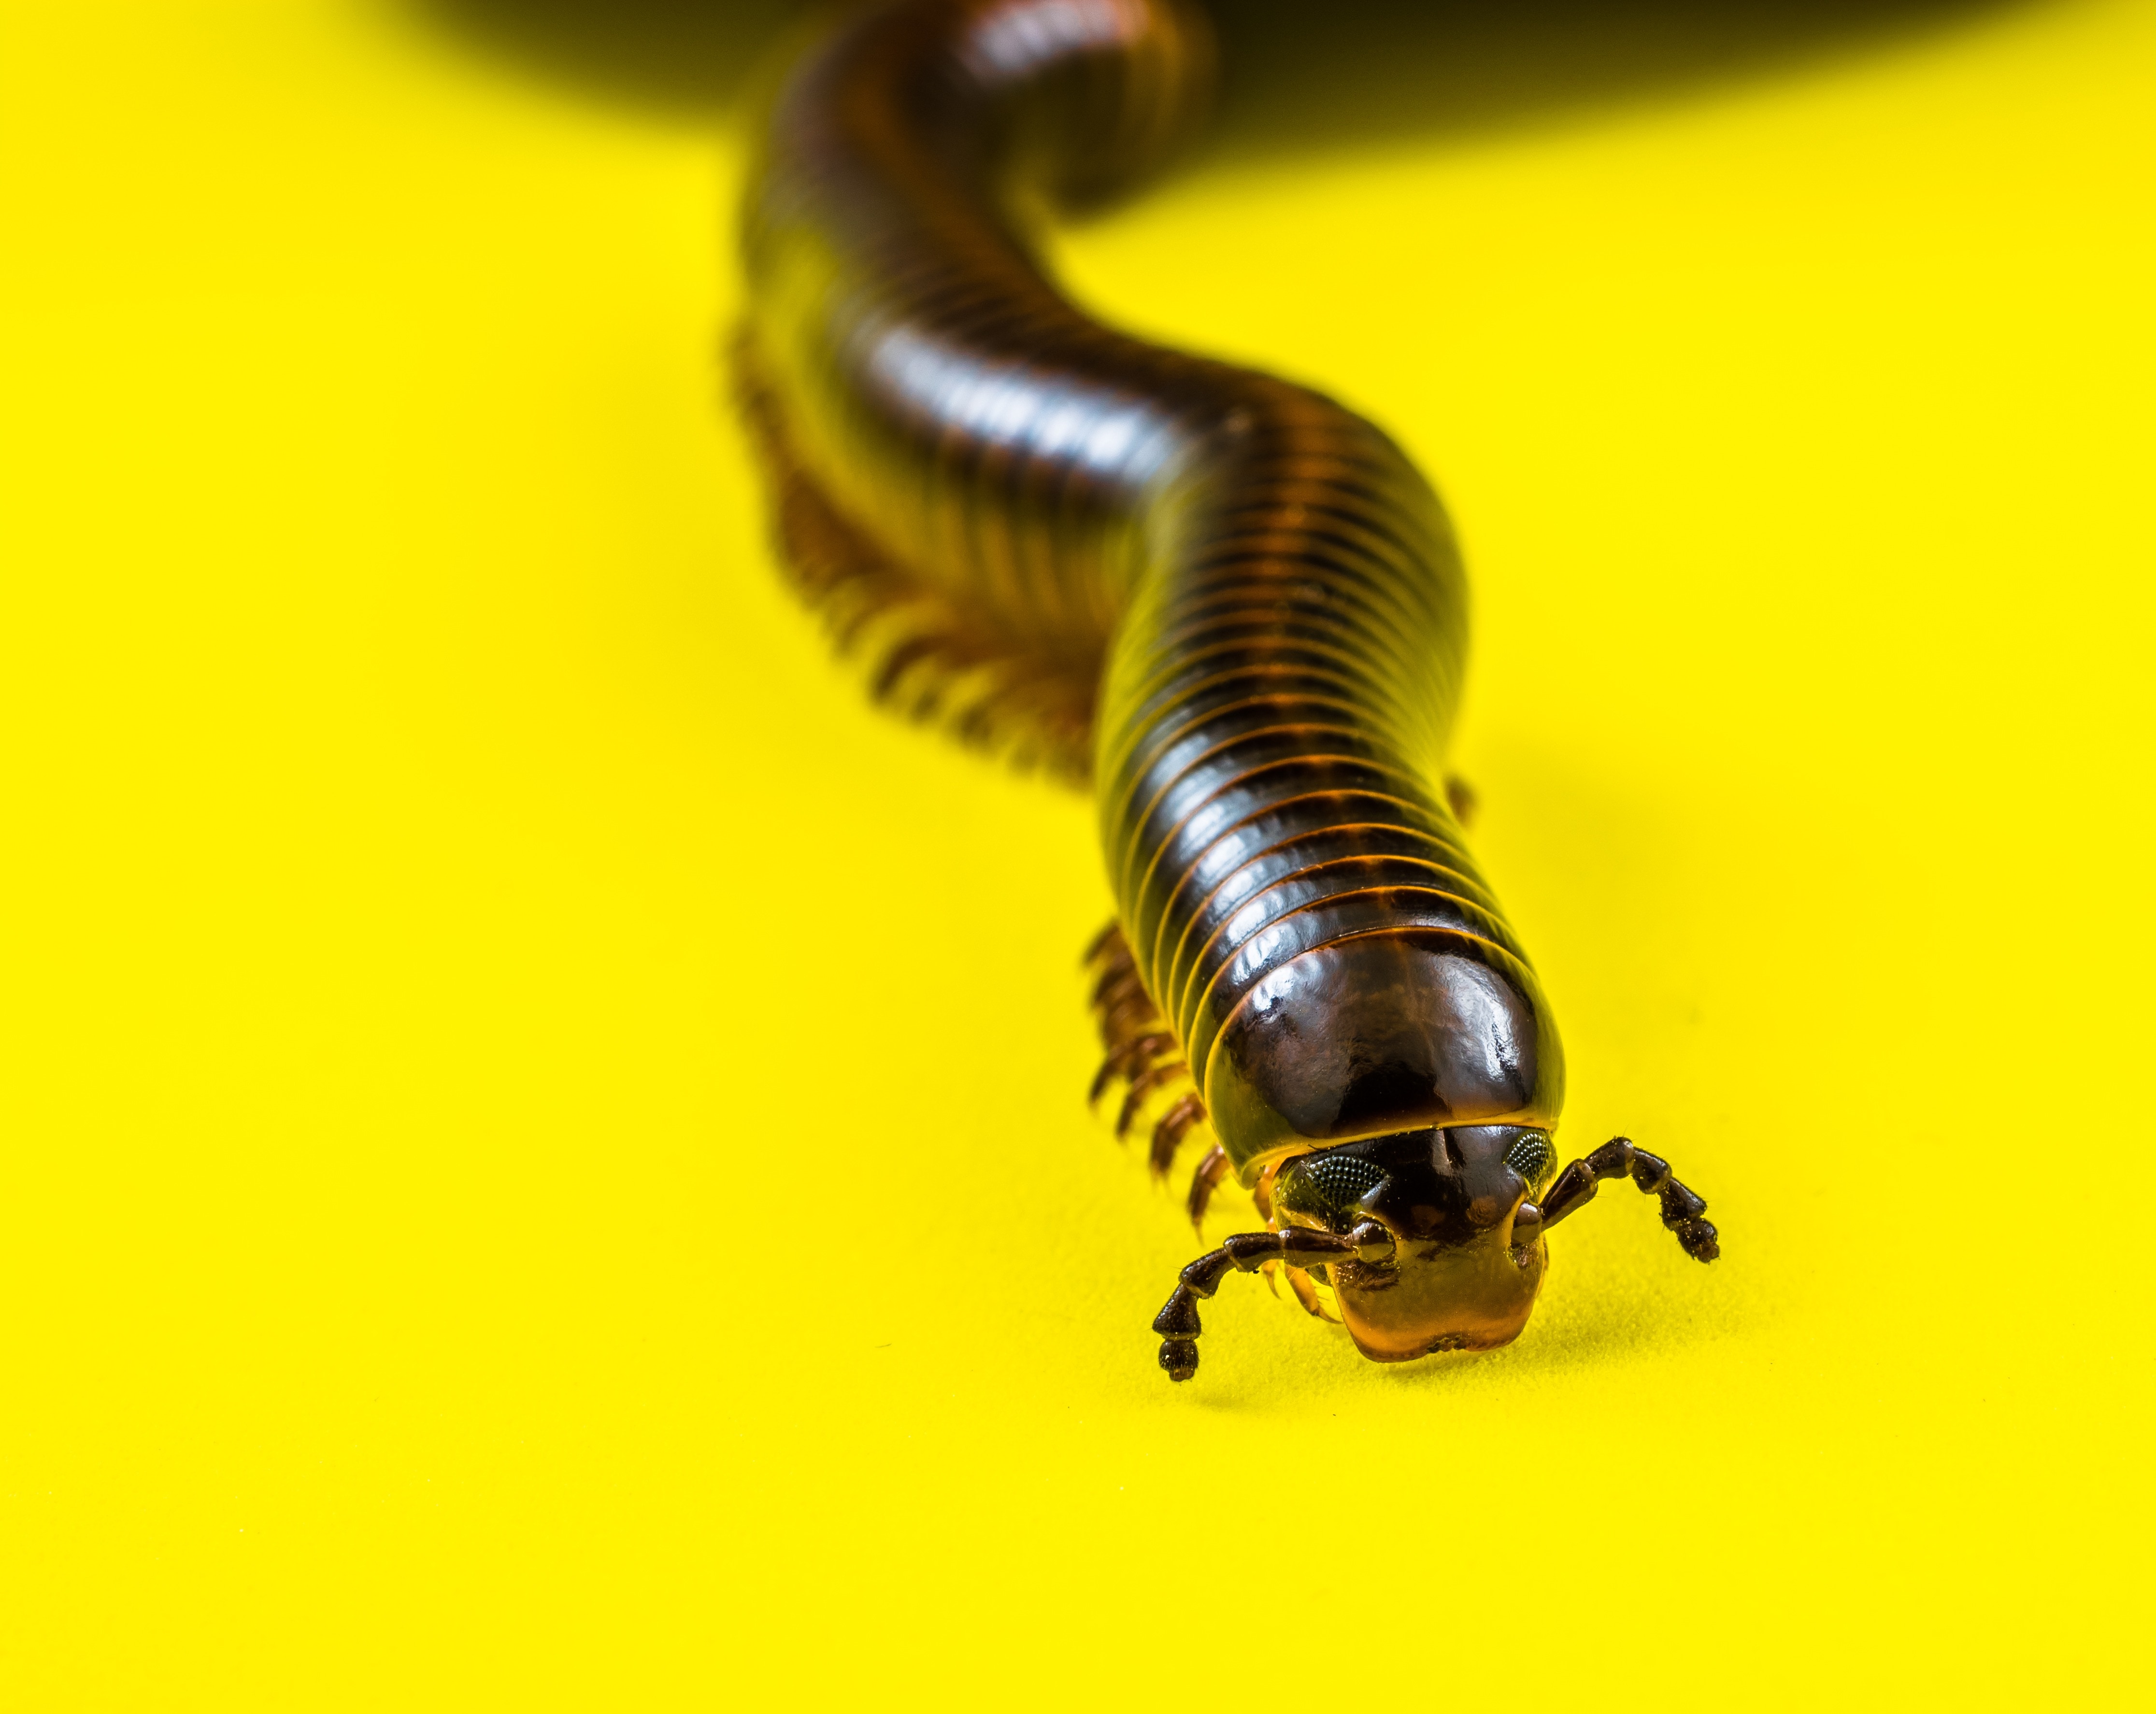 Millipedes, Arthropod, insect, one animal